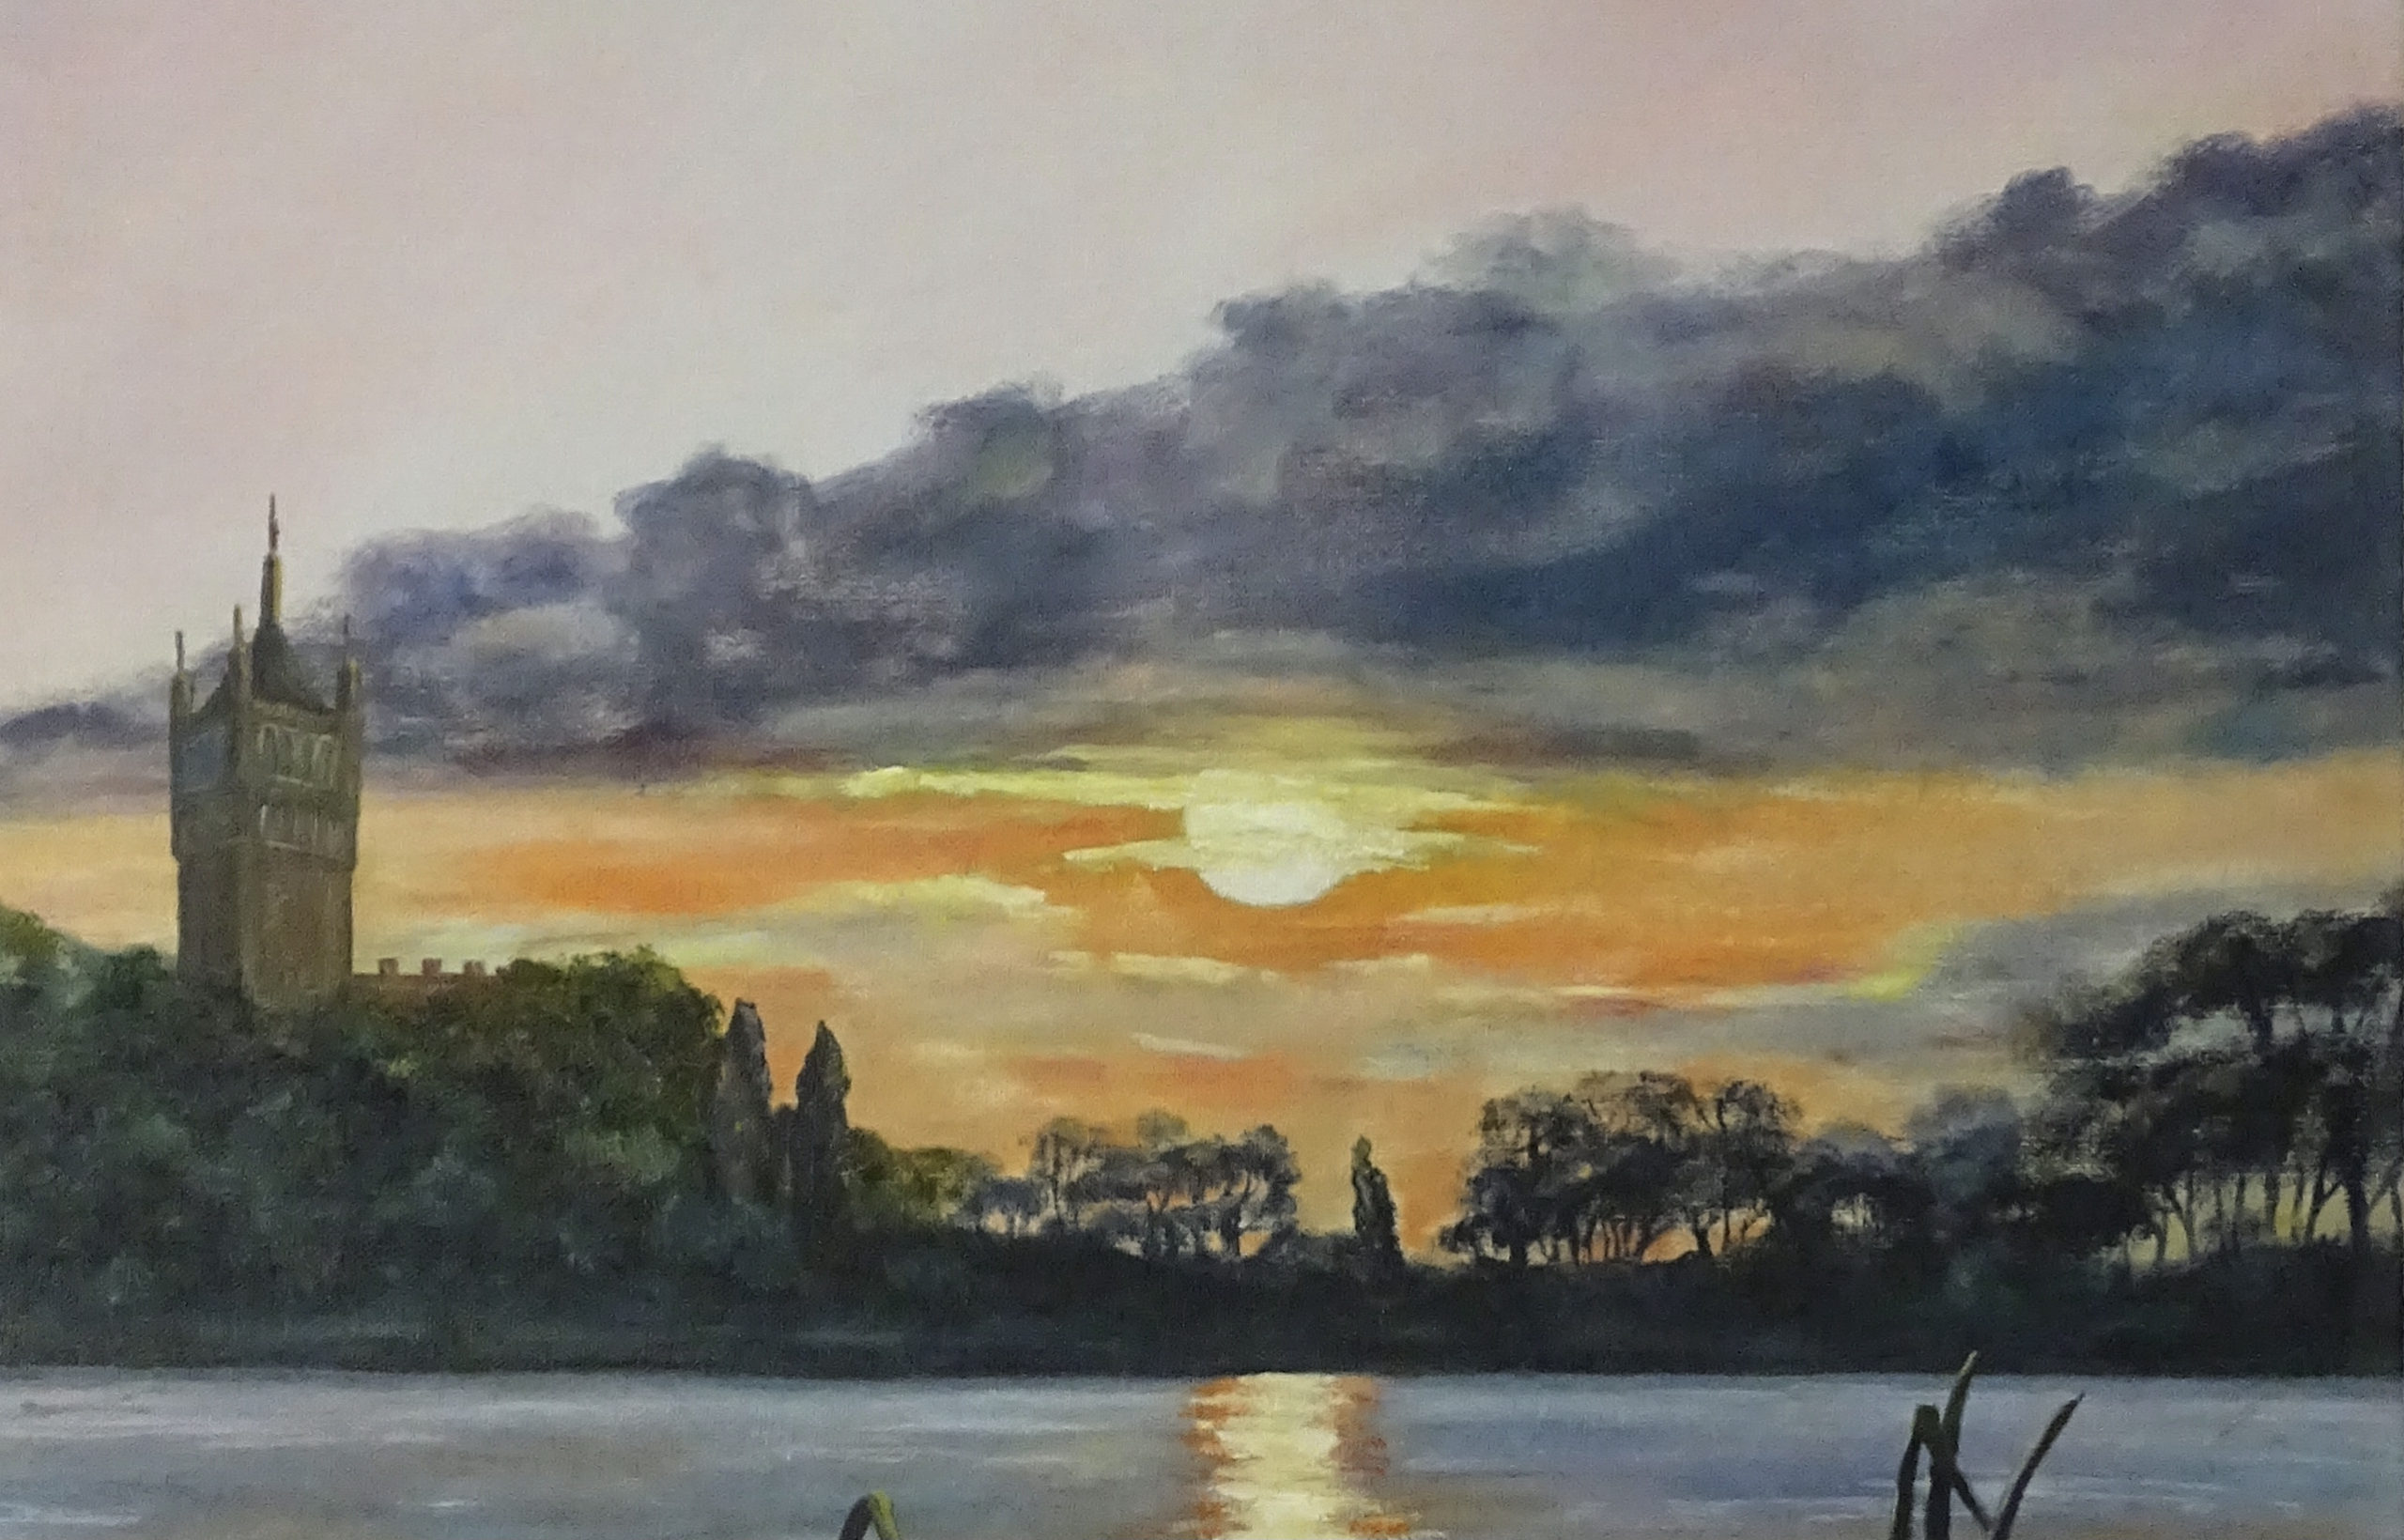 Oil painting of Sunset at Lake Thorpe. View of trees in the foreground, and the Holloway Sanatorium tower peeking above the trees on the left hand side of the painting